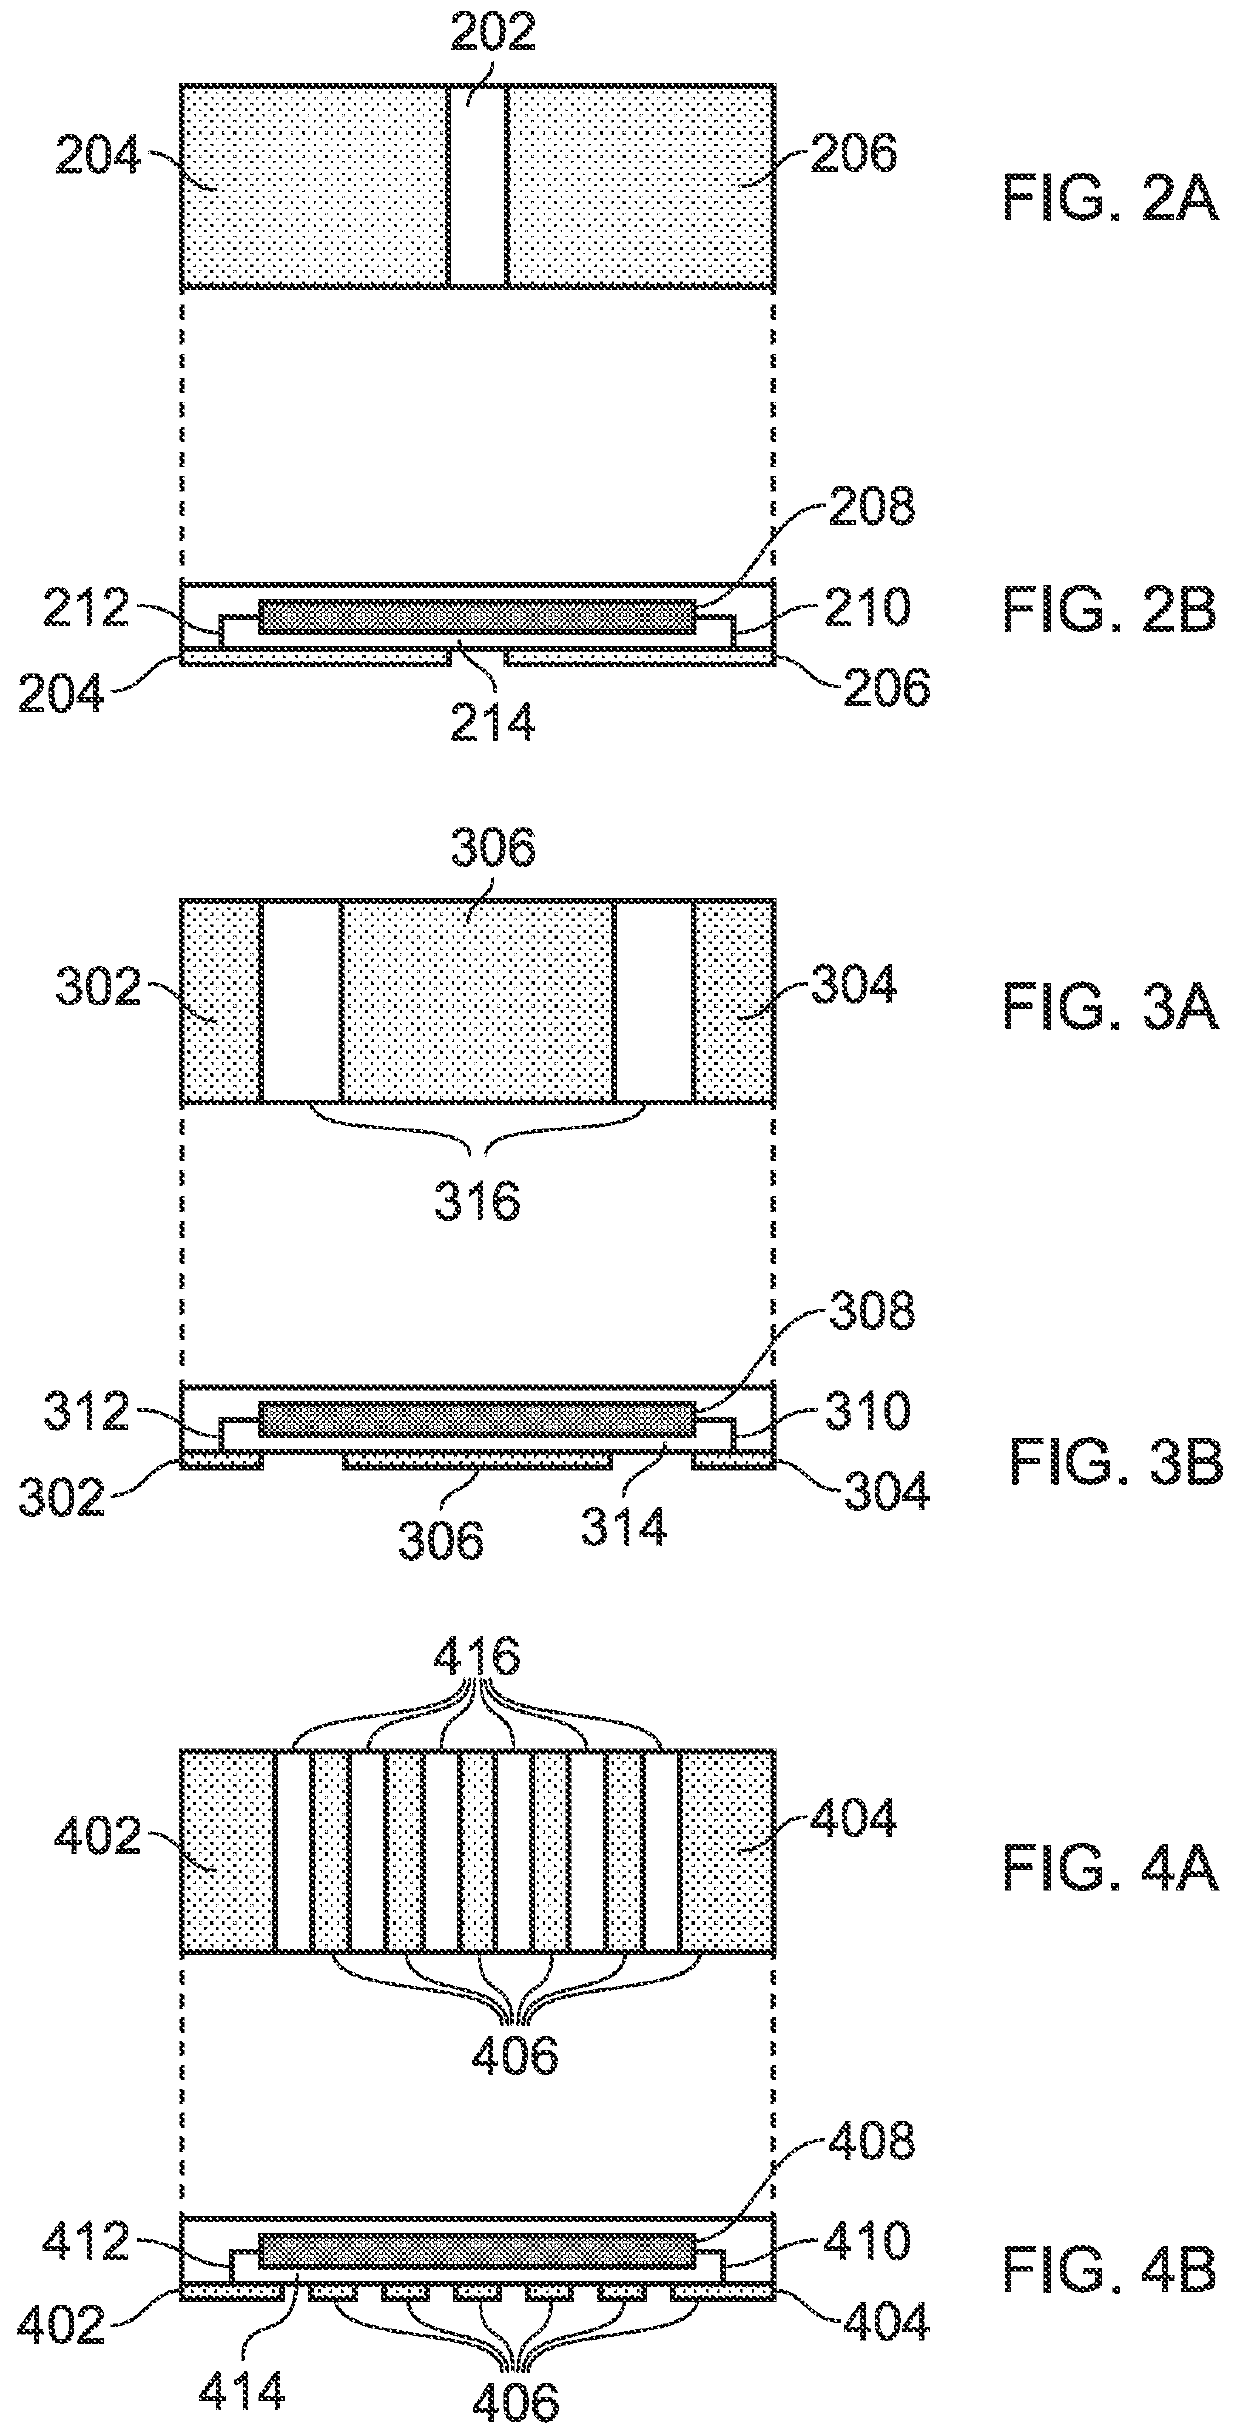 Method of fabricating a conductive layer on an IC using non-lithographic fabrication techniques